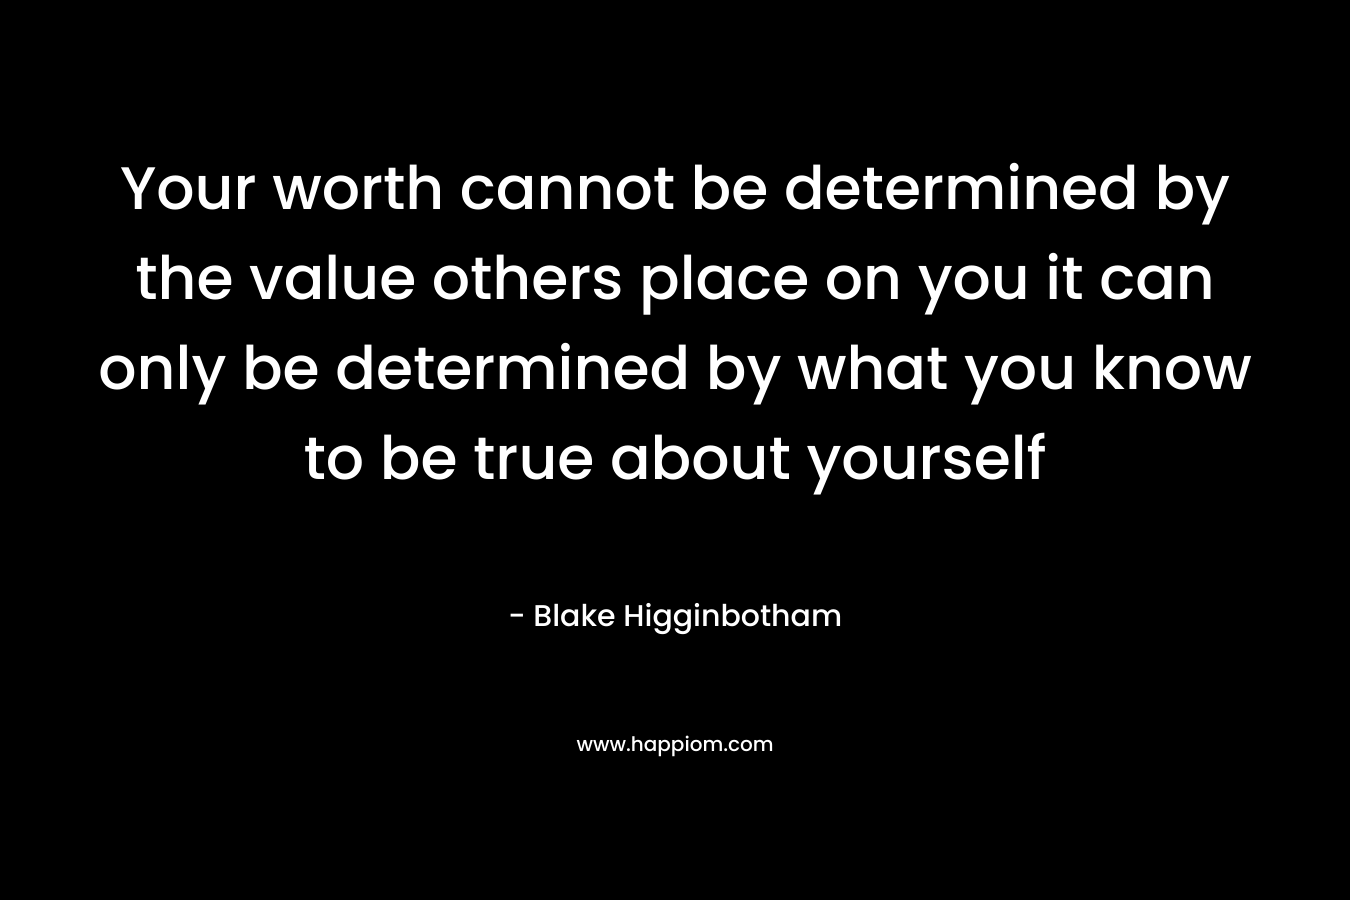 Your worth cannot be determined by the value others place on you it can only be determined by what you know to be true about yourself – Blake Higginbotham